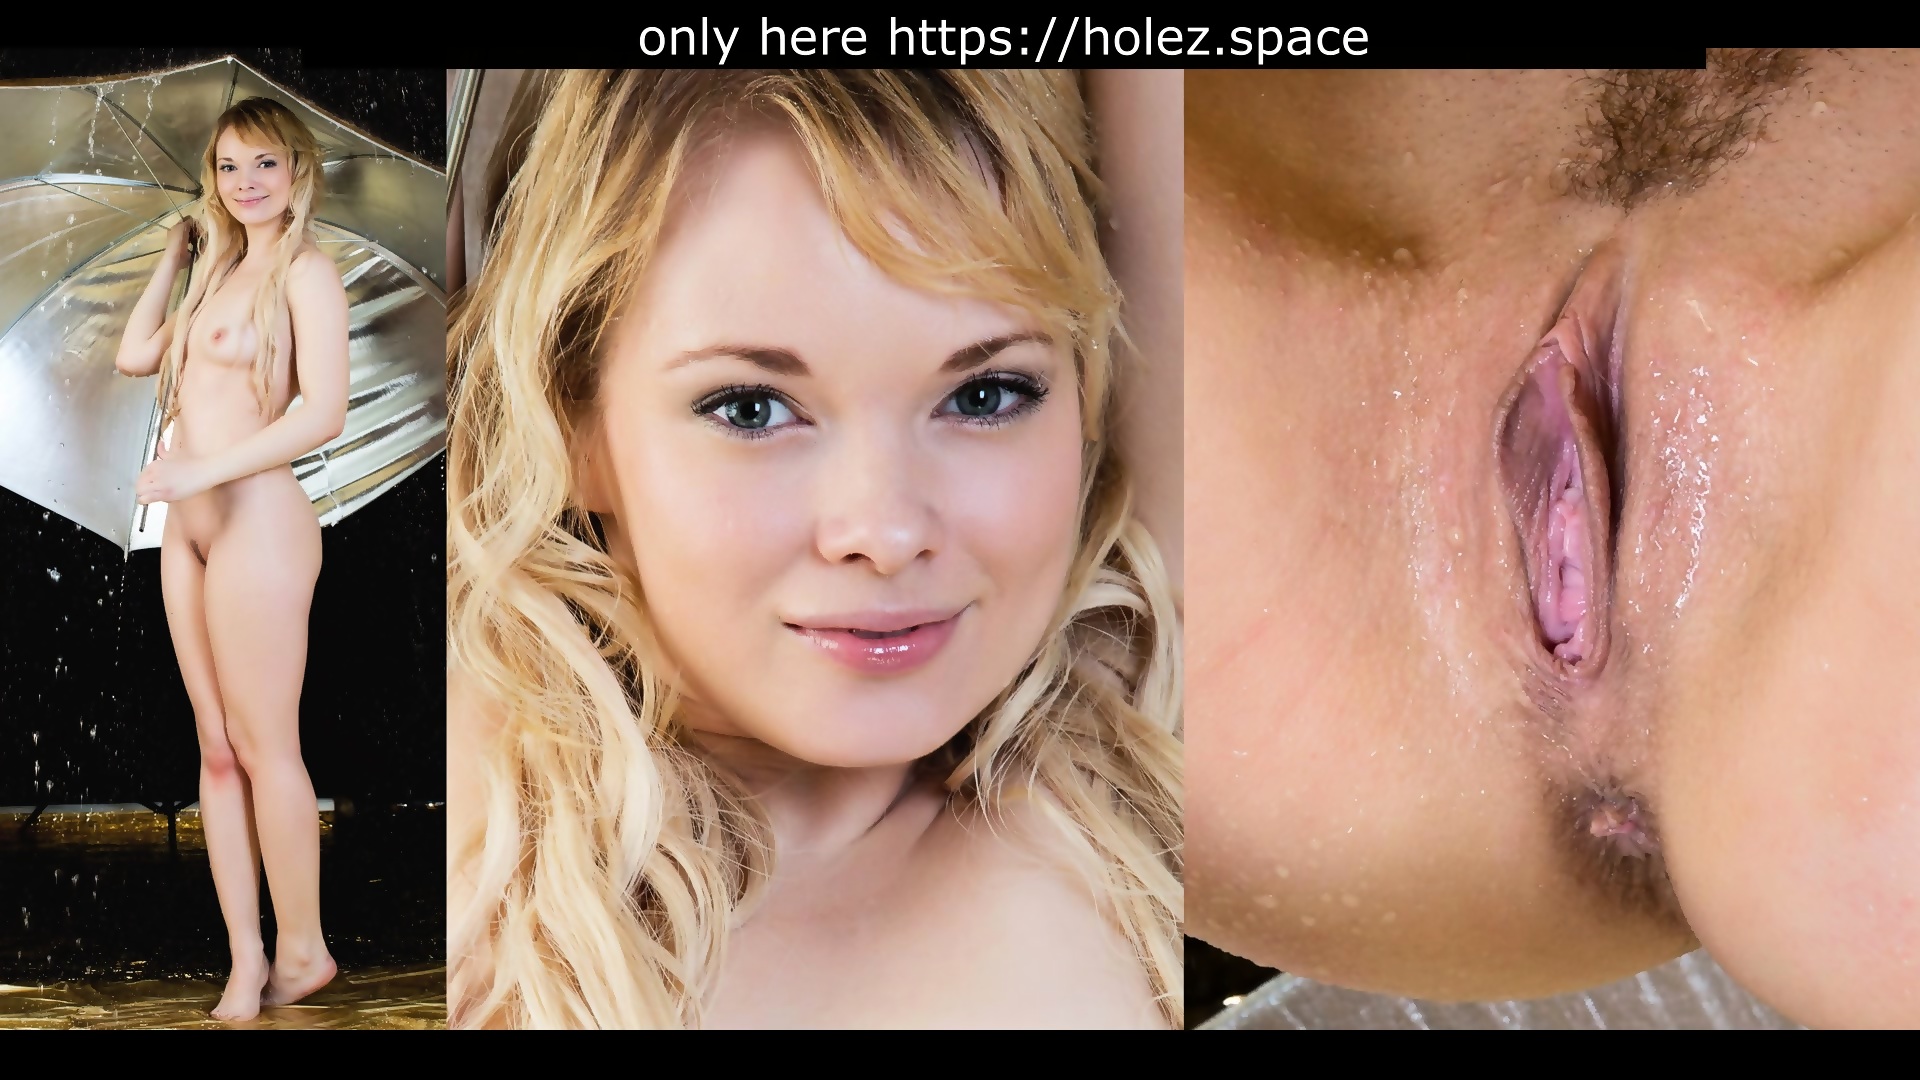 Ultra Hd Pussy Compiltion - Face And Vagina. Compilation #5 - EPORNER